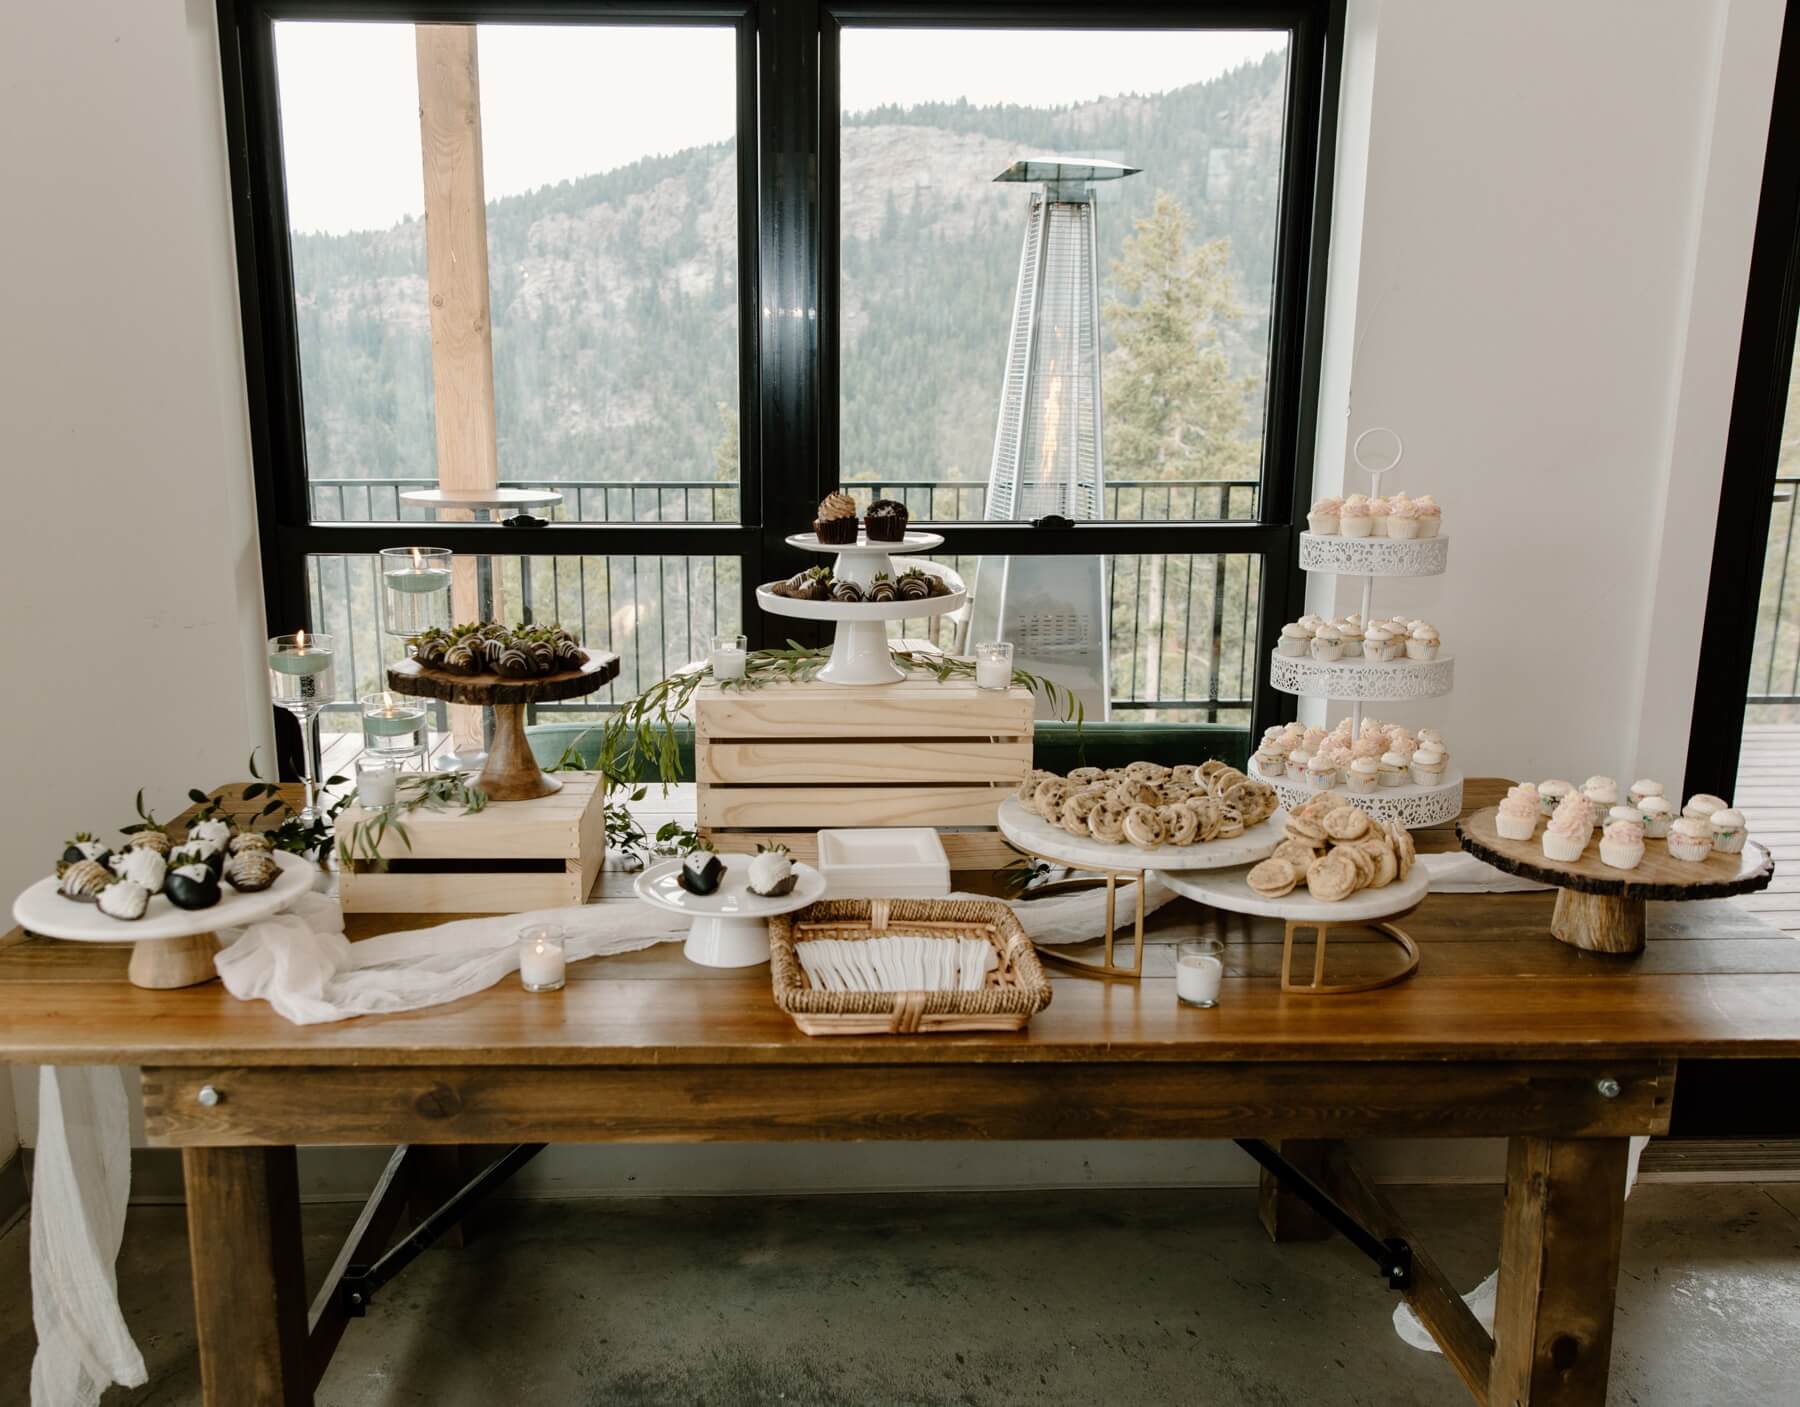 Dessert table with cookies, chocolate covered strawberries, and cupcakes at Idaho Springs Wedding venue | McArthur Weddings and Events